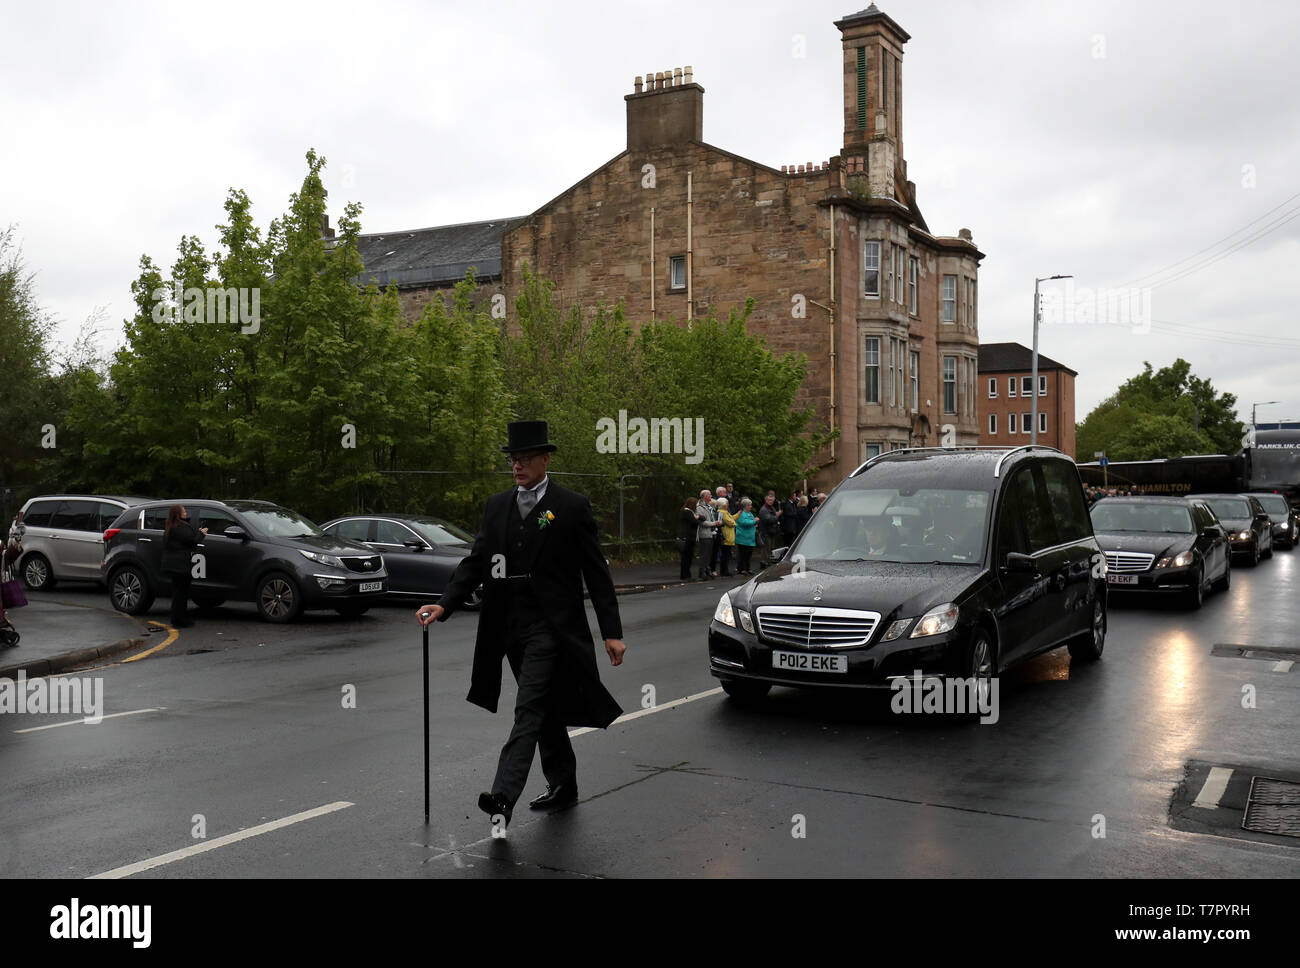 The funeral procession passes through the Calton are of Glasgow. Stock Photo